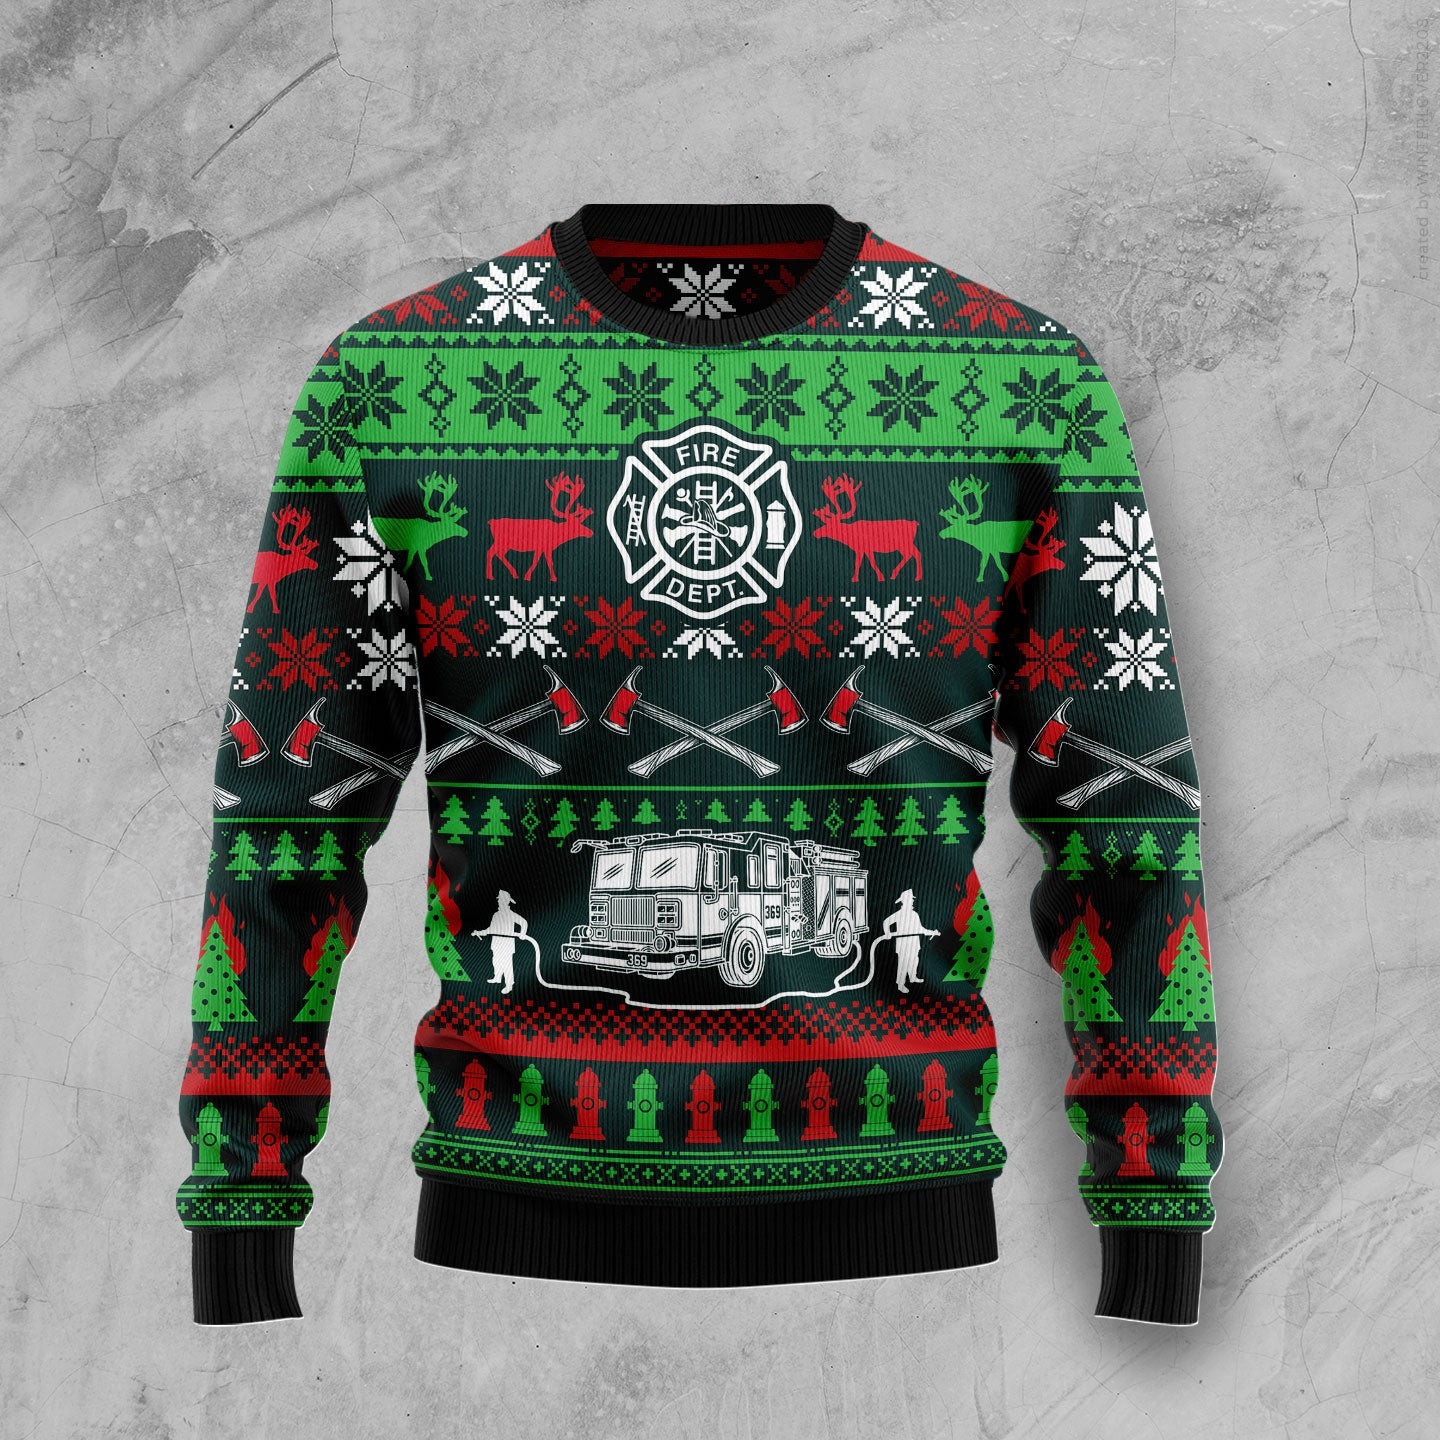 Awesome Firefighter Ugly Christmas Sweater, Ugly Sweater For Men Women, Holiday Sweater